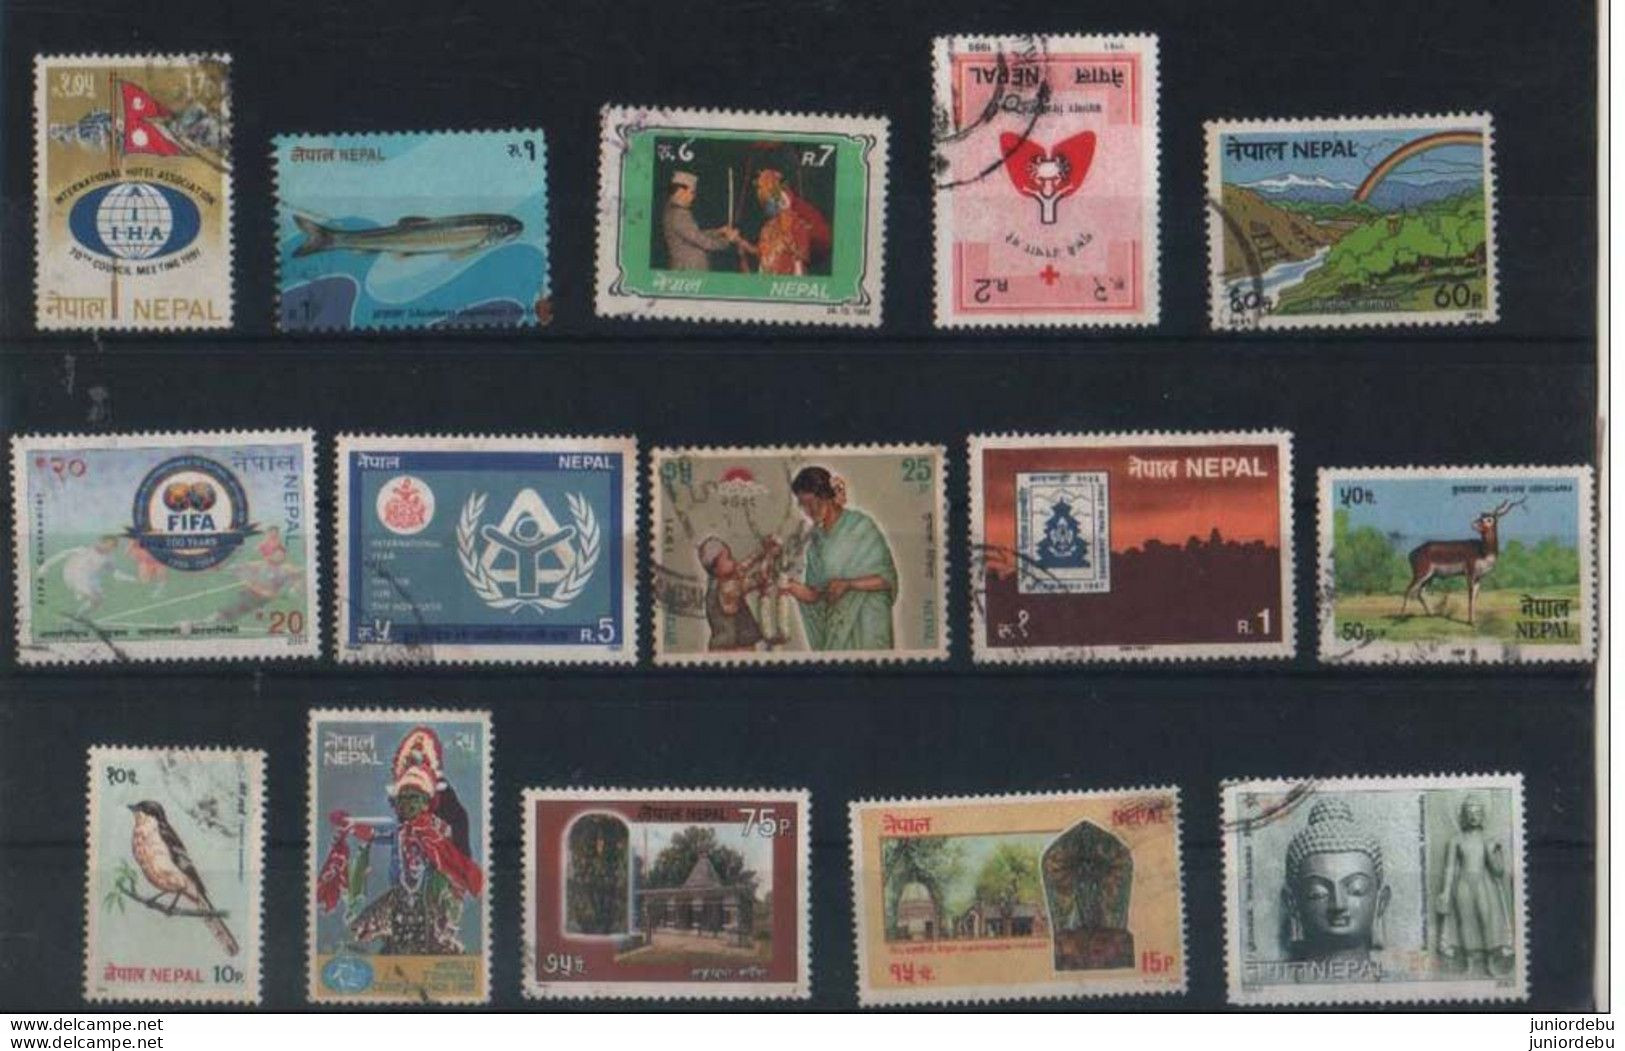 Nepal - 15 Different Stamps -  Used - ( Condition As Per Scan ) ( Soccer, Bird, Fish, Buddha ) ( OL 09/08/2021 ) - Népal